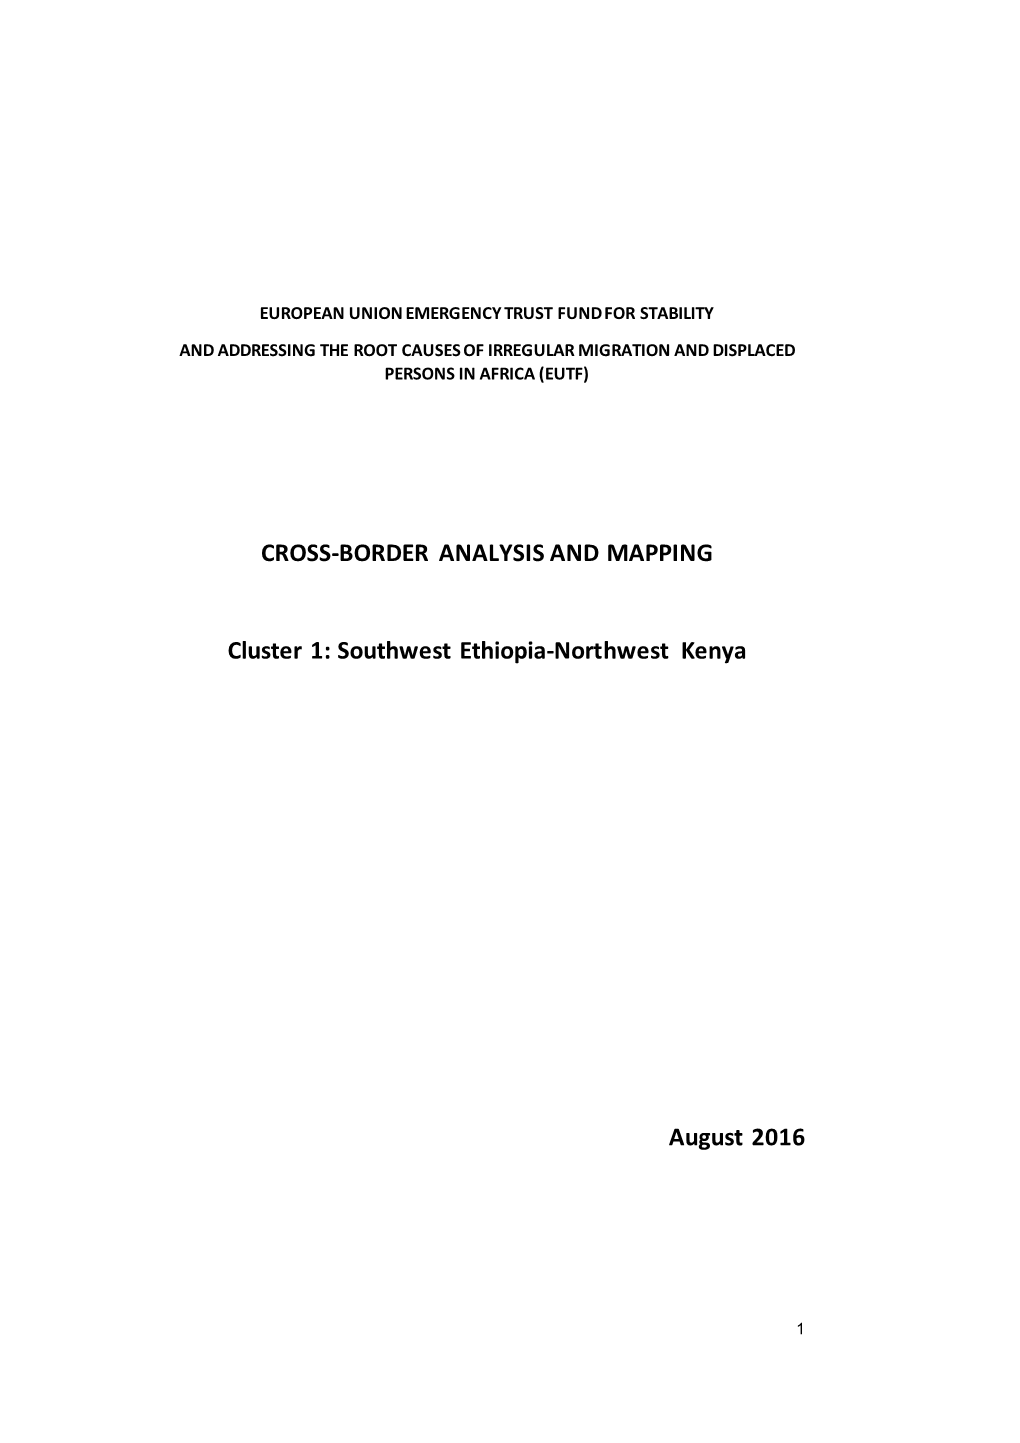 Cross Border Analysis and Mapping, Cluster 1Field Report